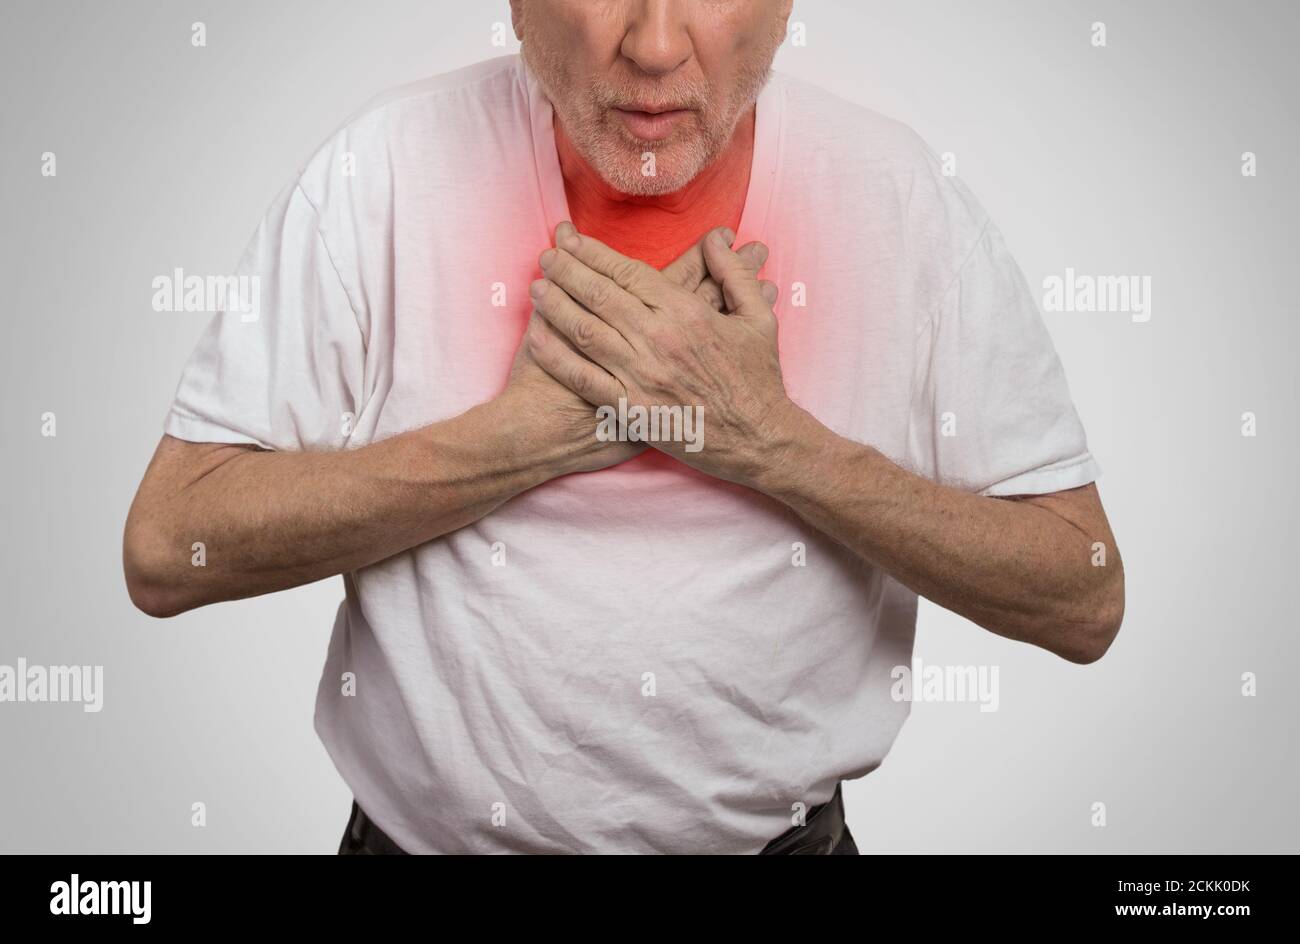 Closeup portrait sick old man, elderly guy, having severe infection, chest pain, looking miserable unwell, trying to catch his breath isolated on gray Stock Photo